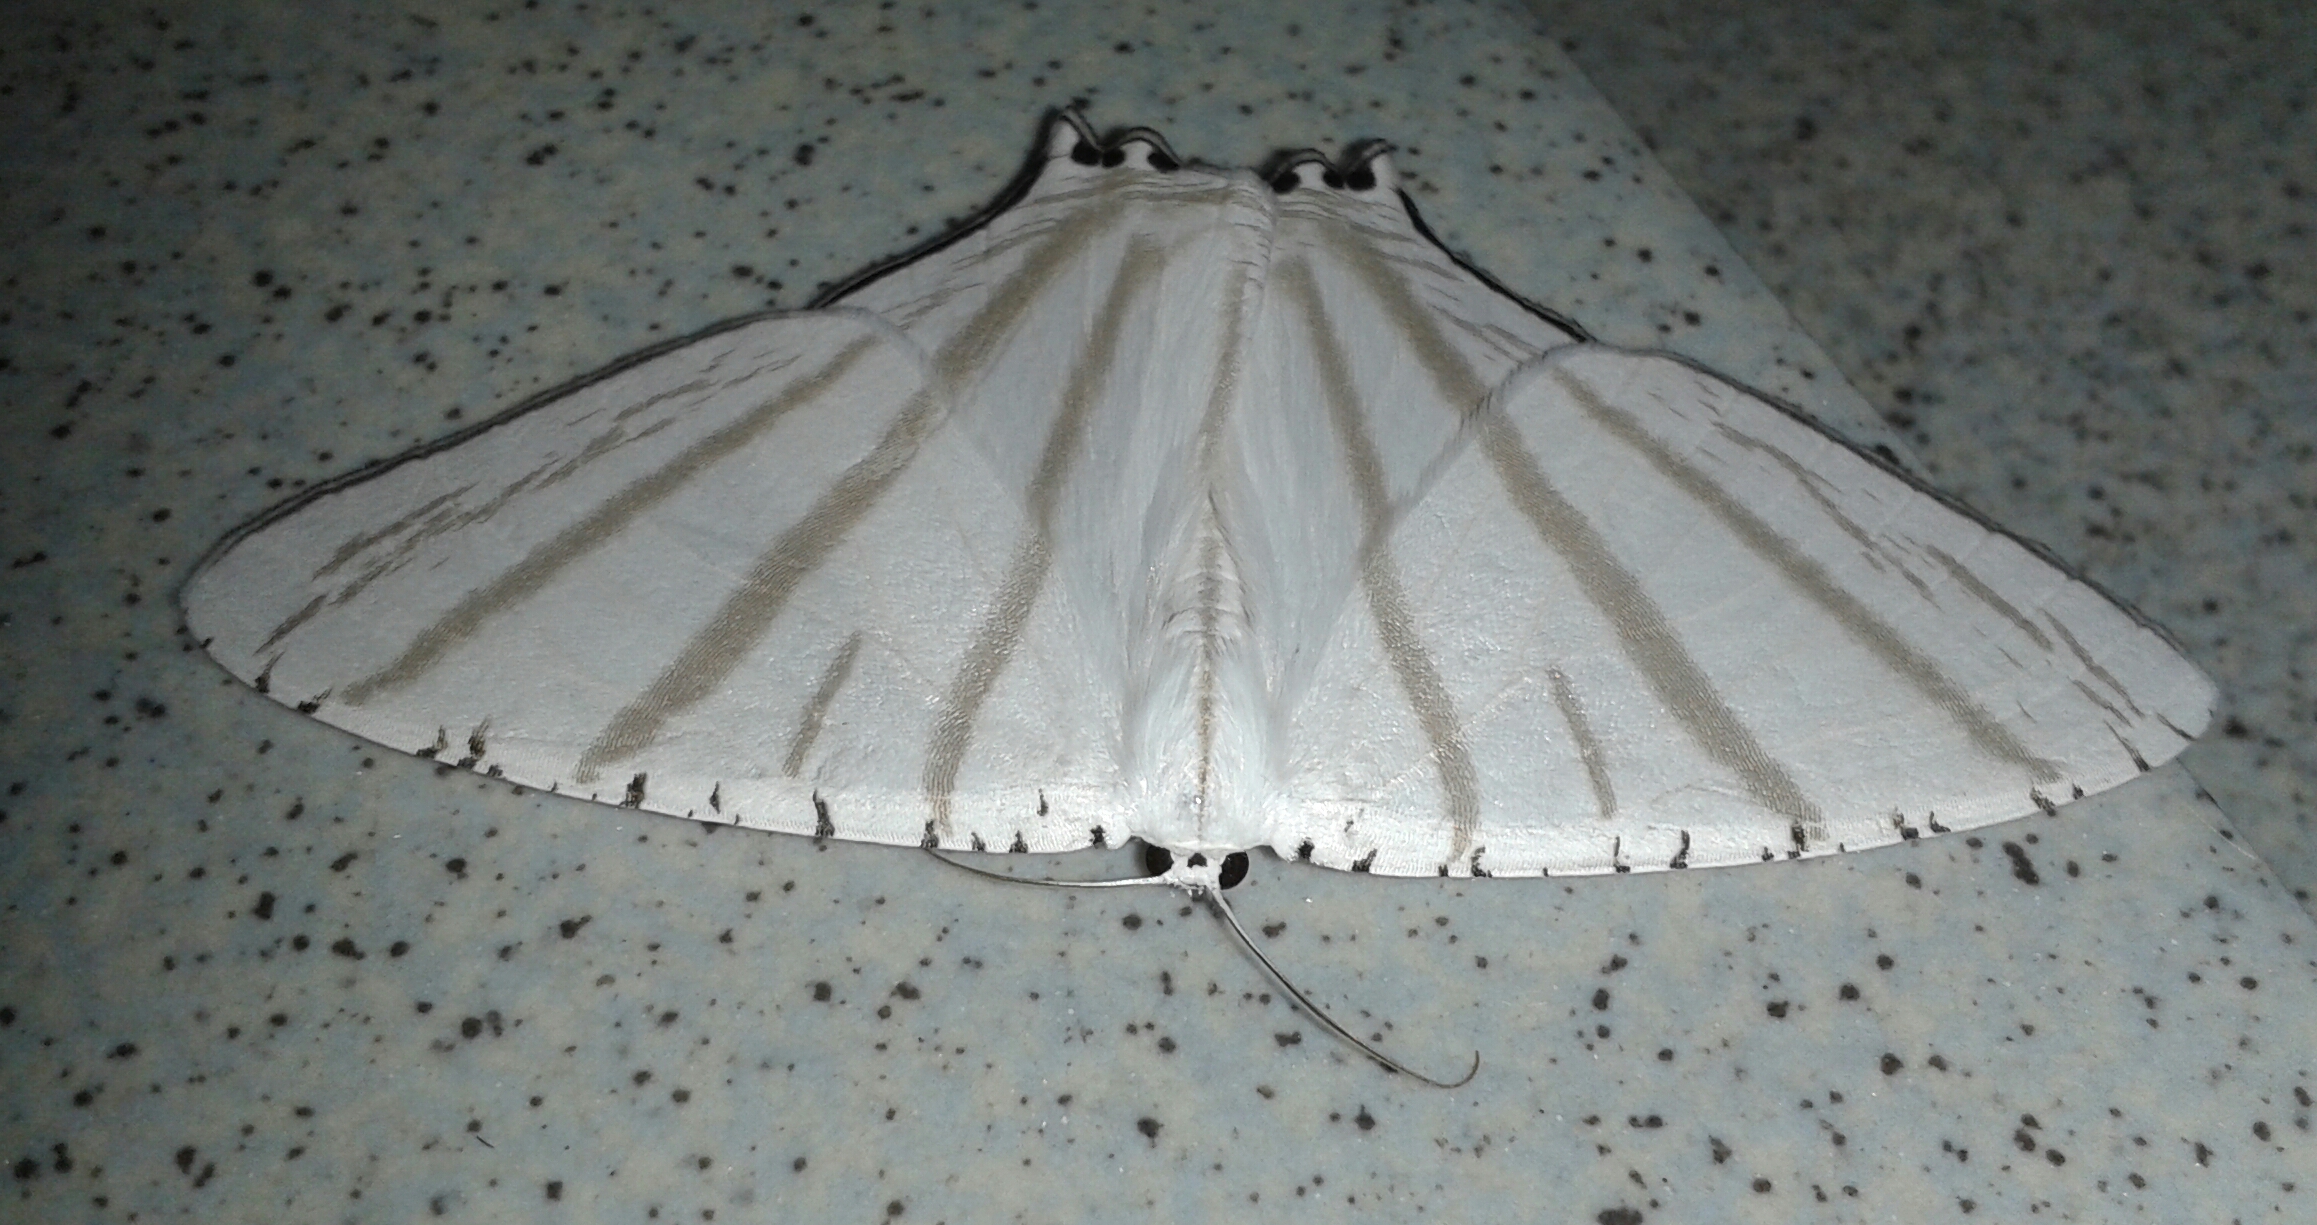 a white erfly sitting on a table with dark dots